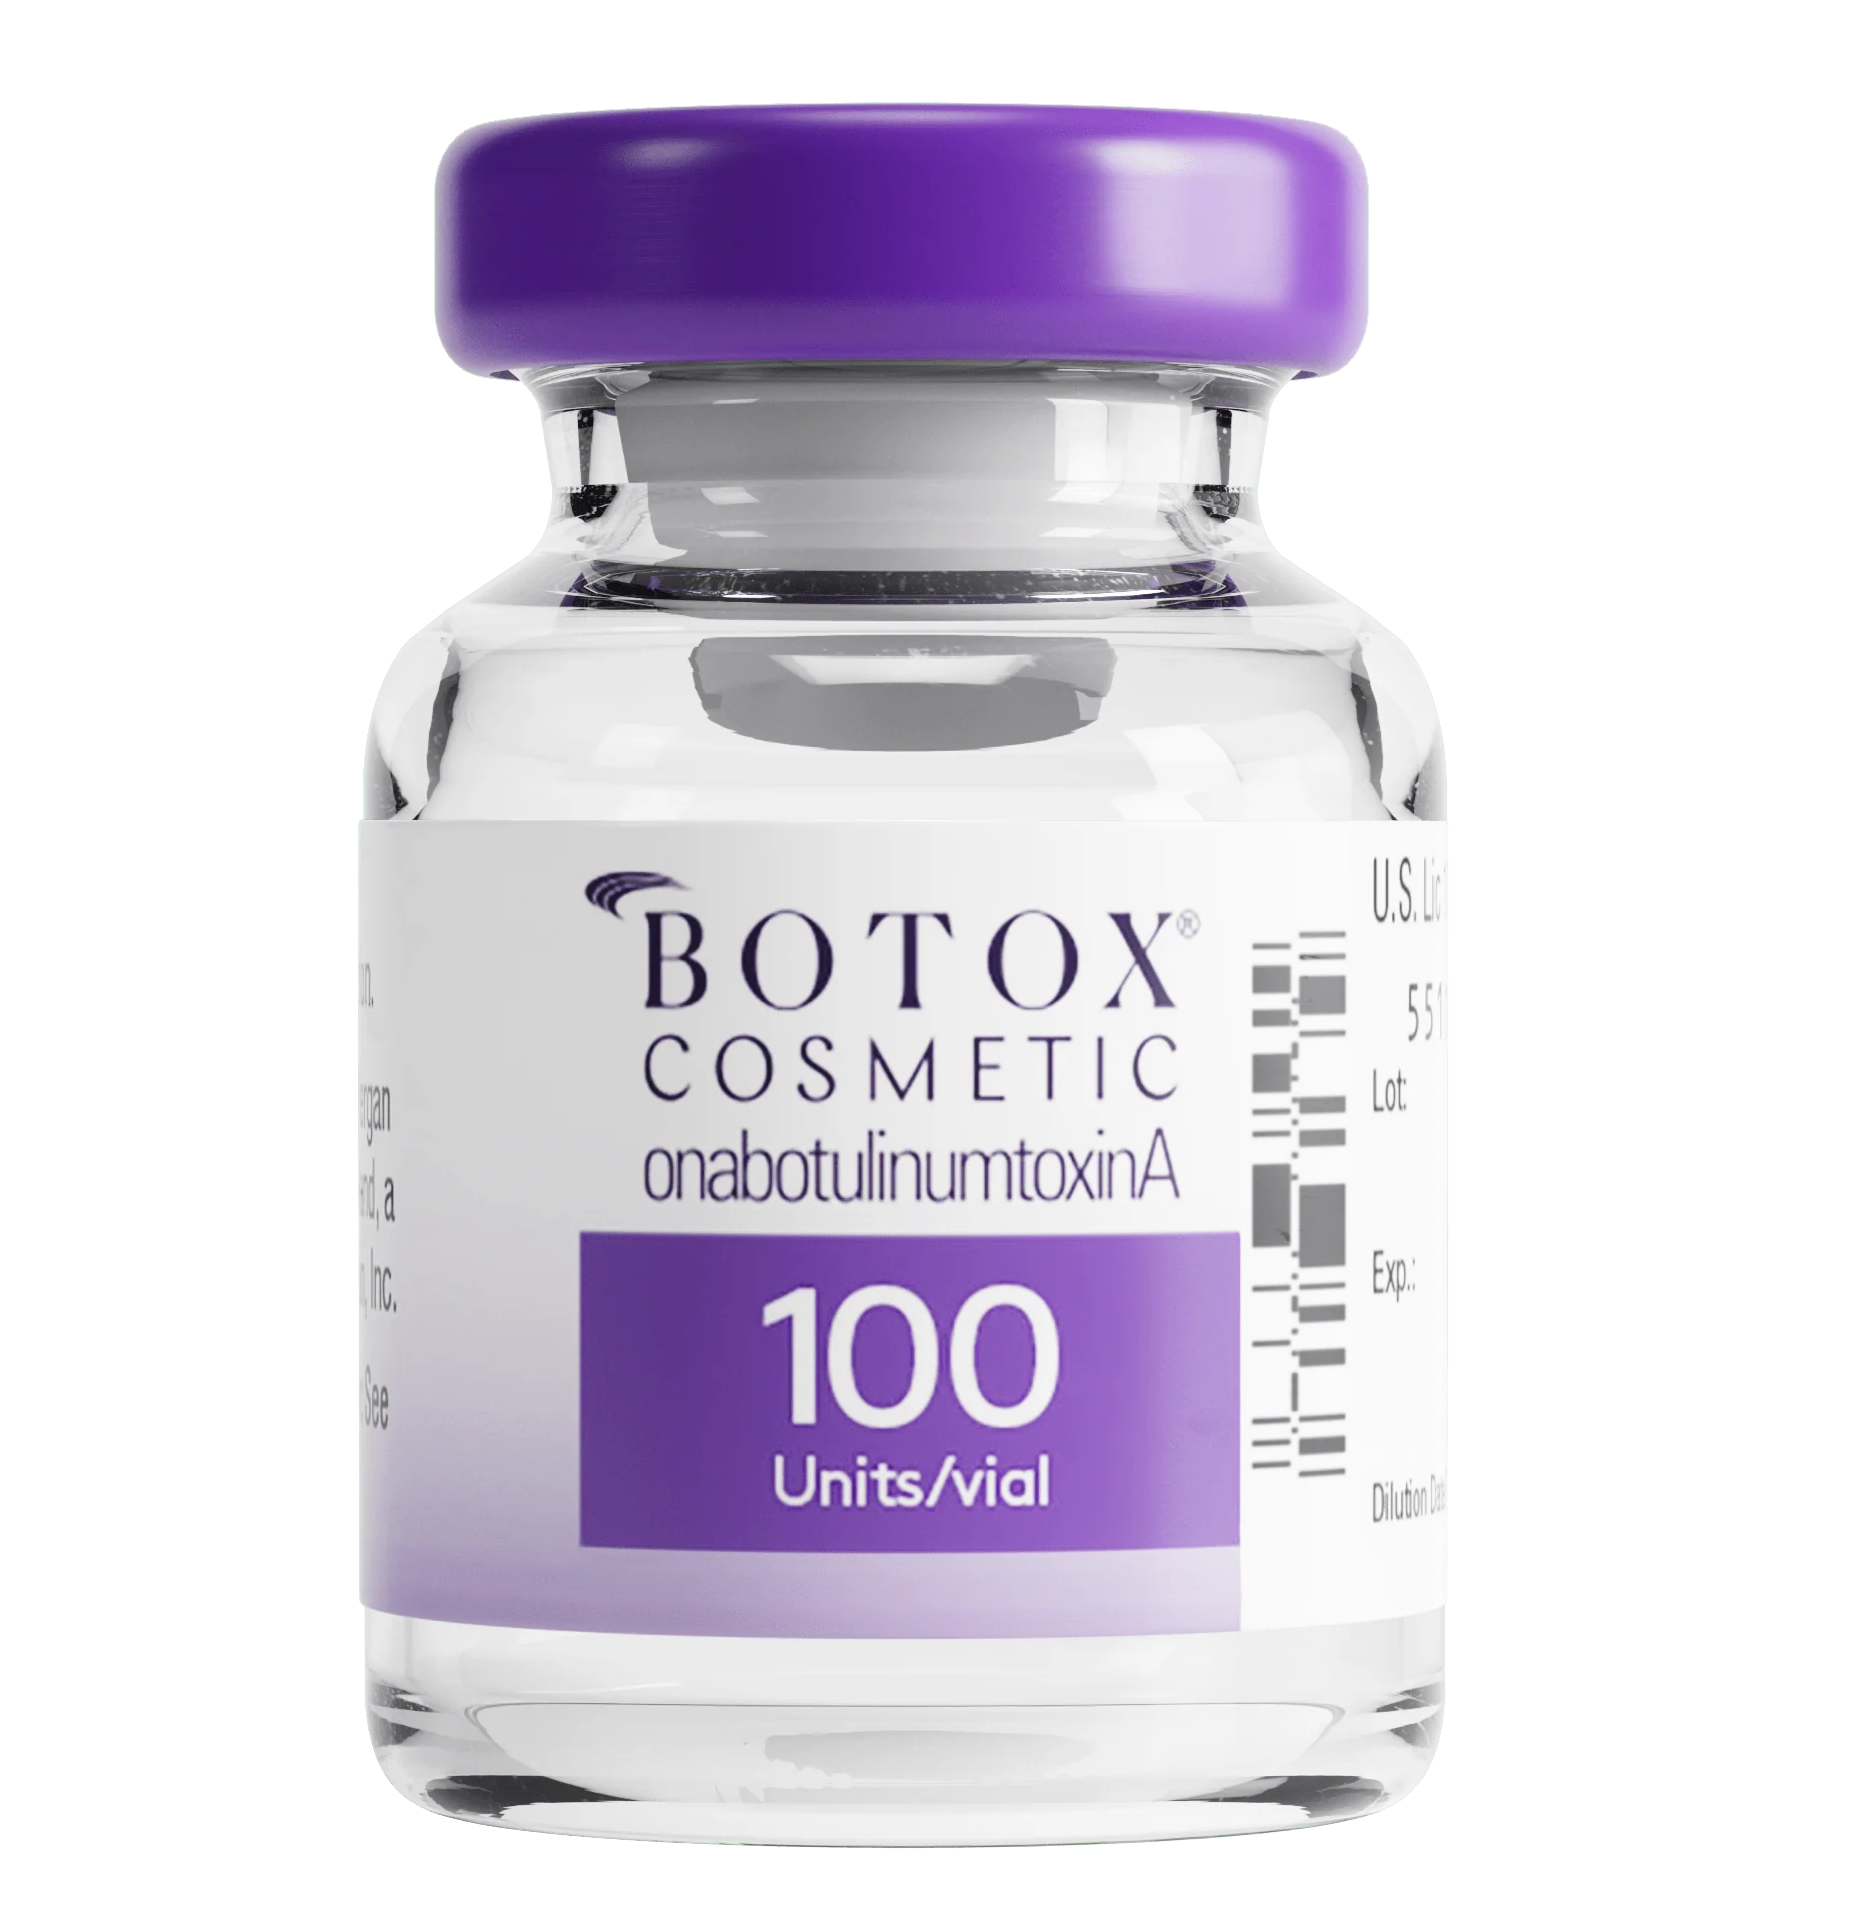 Botox Cosmetic Onabotulinumtoxina 100 Units Per Vial For Wrinkle Treatment And Cosmetic Use.